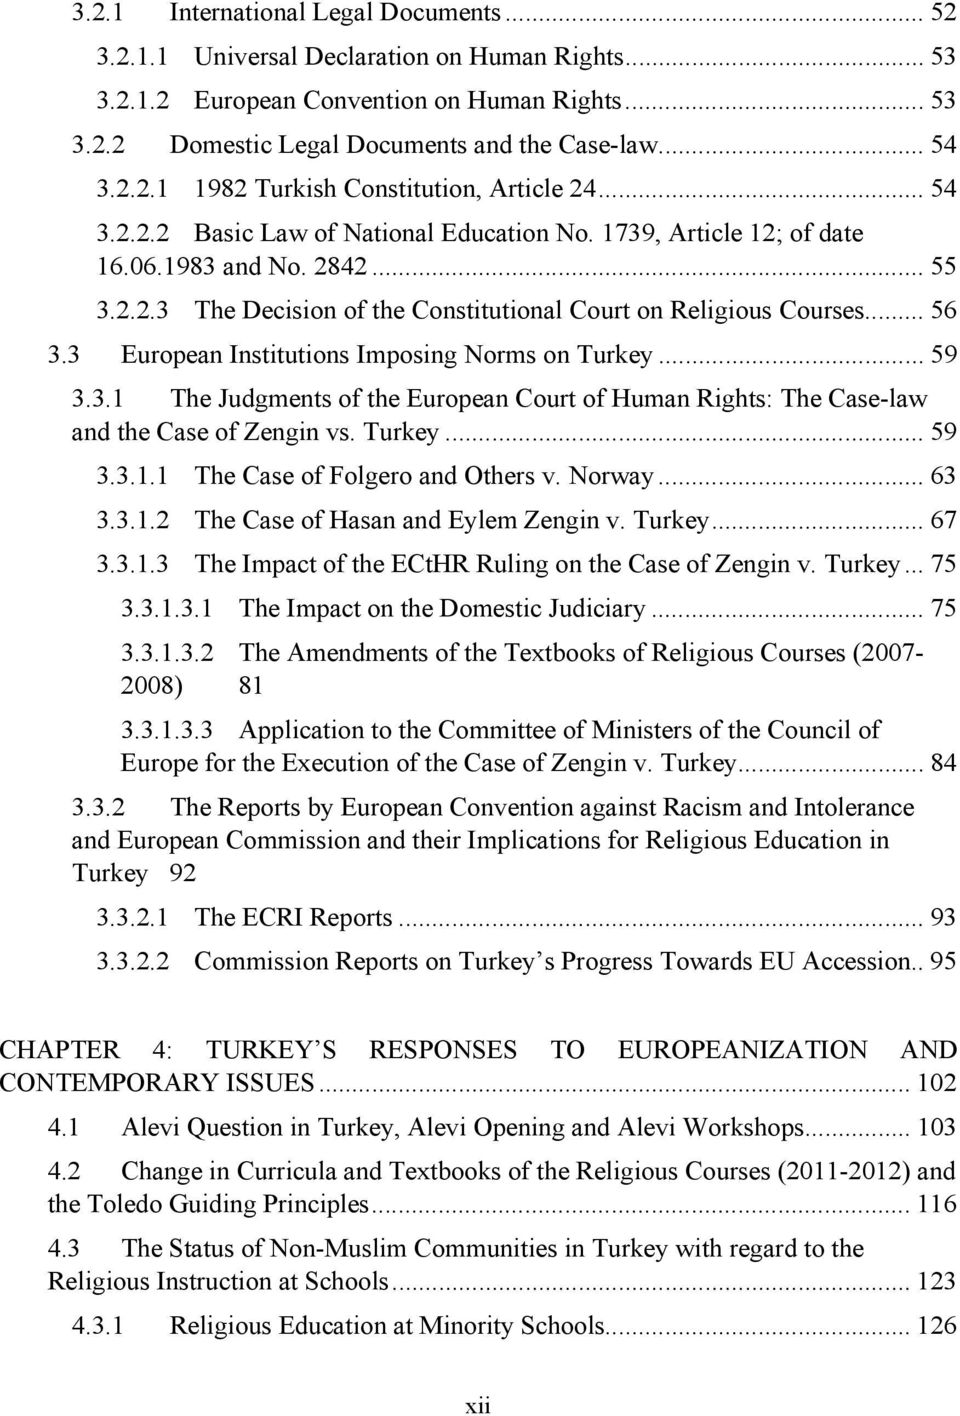 .. 56 3.3 European Institutions Imposing Norms on Turkey... 59 3.3.1 The Judgments of the European Court of Human Rights: The Case-law and the Case of Zengin vs. Turkey... 59 3.3.1.1 The Case of Folgero and Others v.